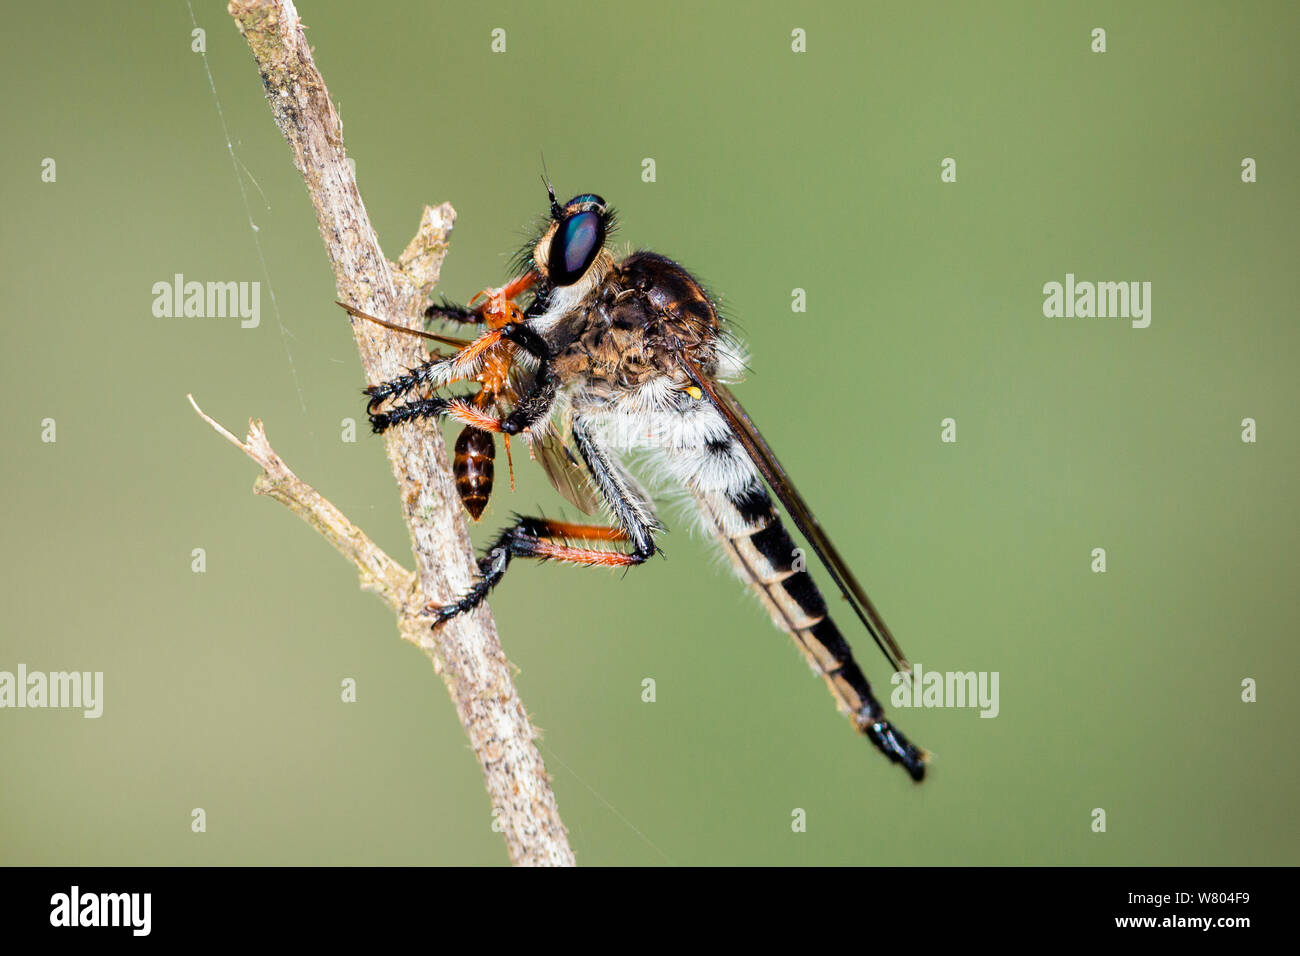 Robber fly (Asilidae) with prey (ant) in rainforest, Asilidae, Panguana Reserve, Huanuca province, Amazon basin, Peru. Stock Photo